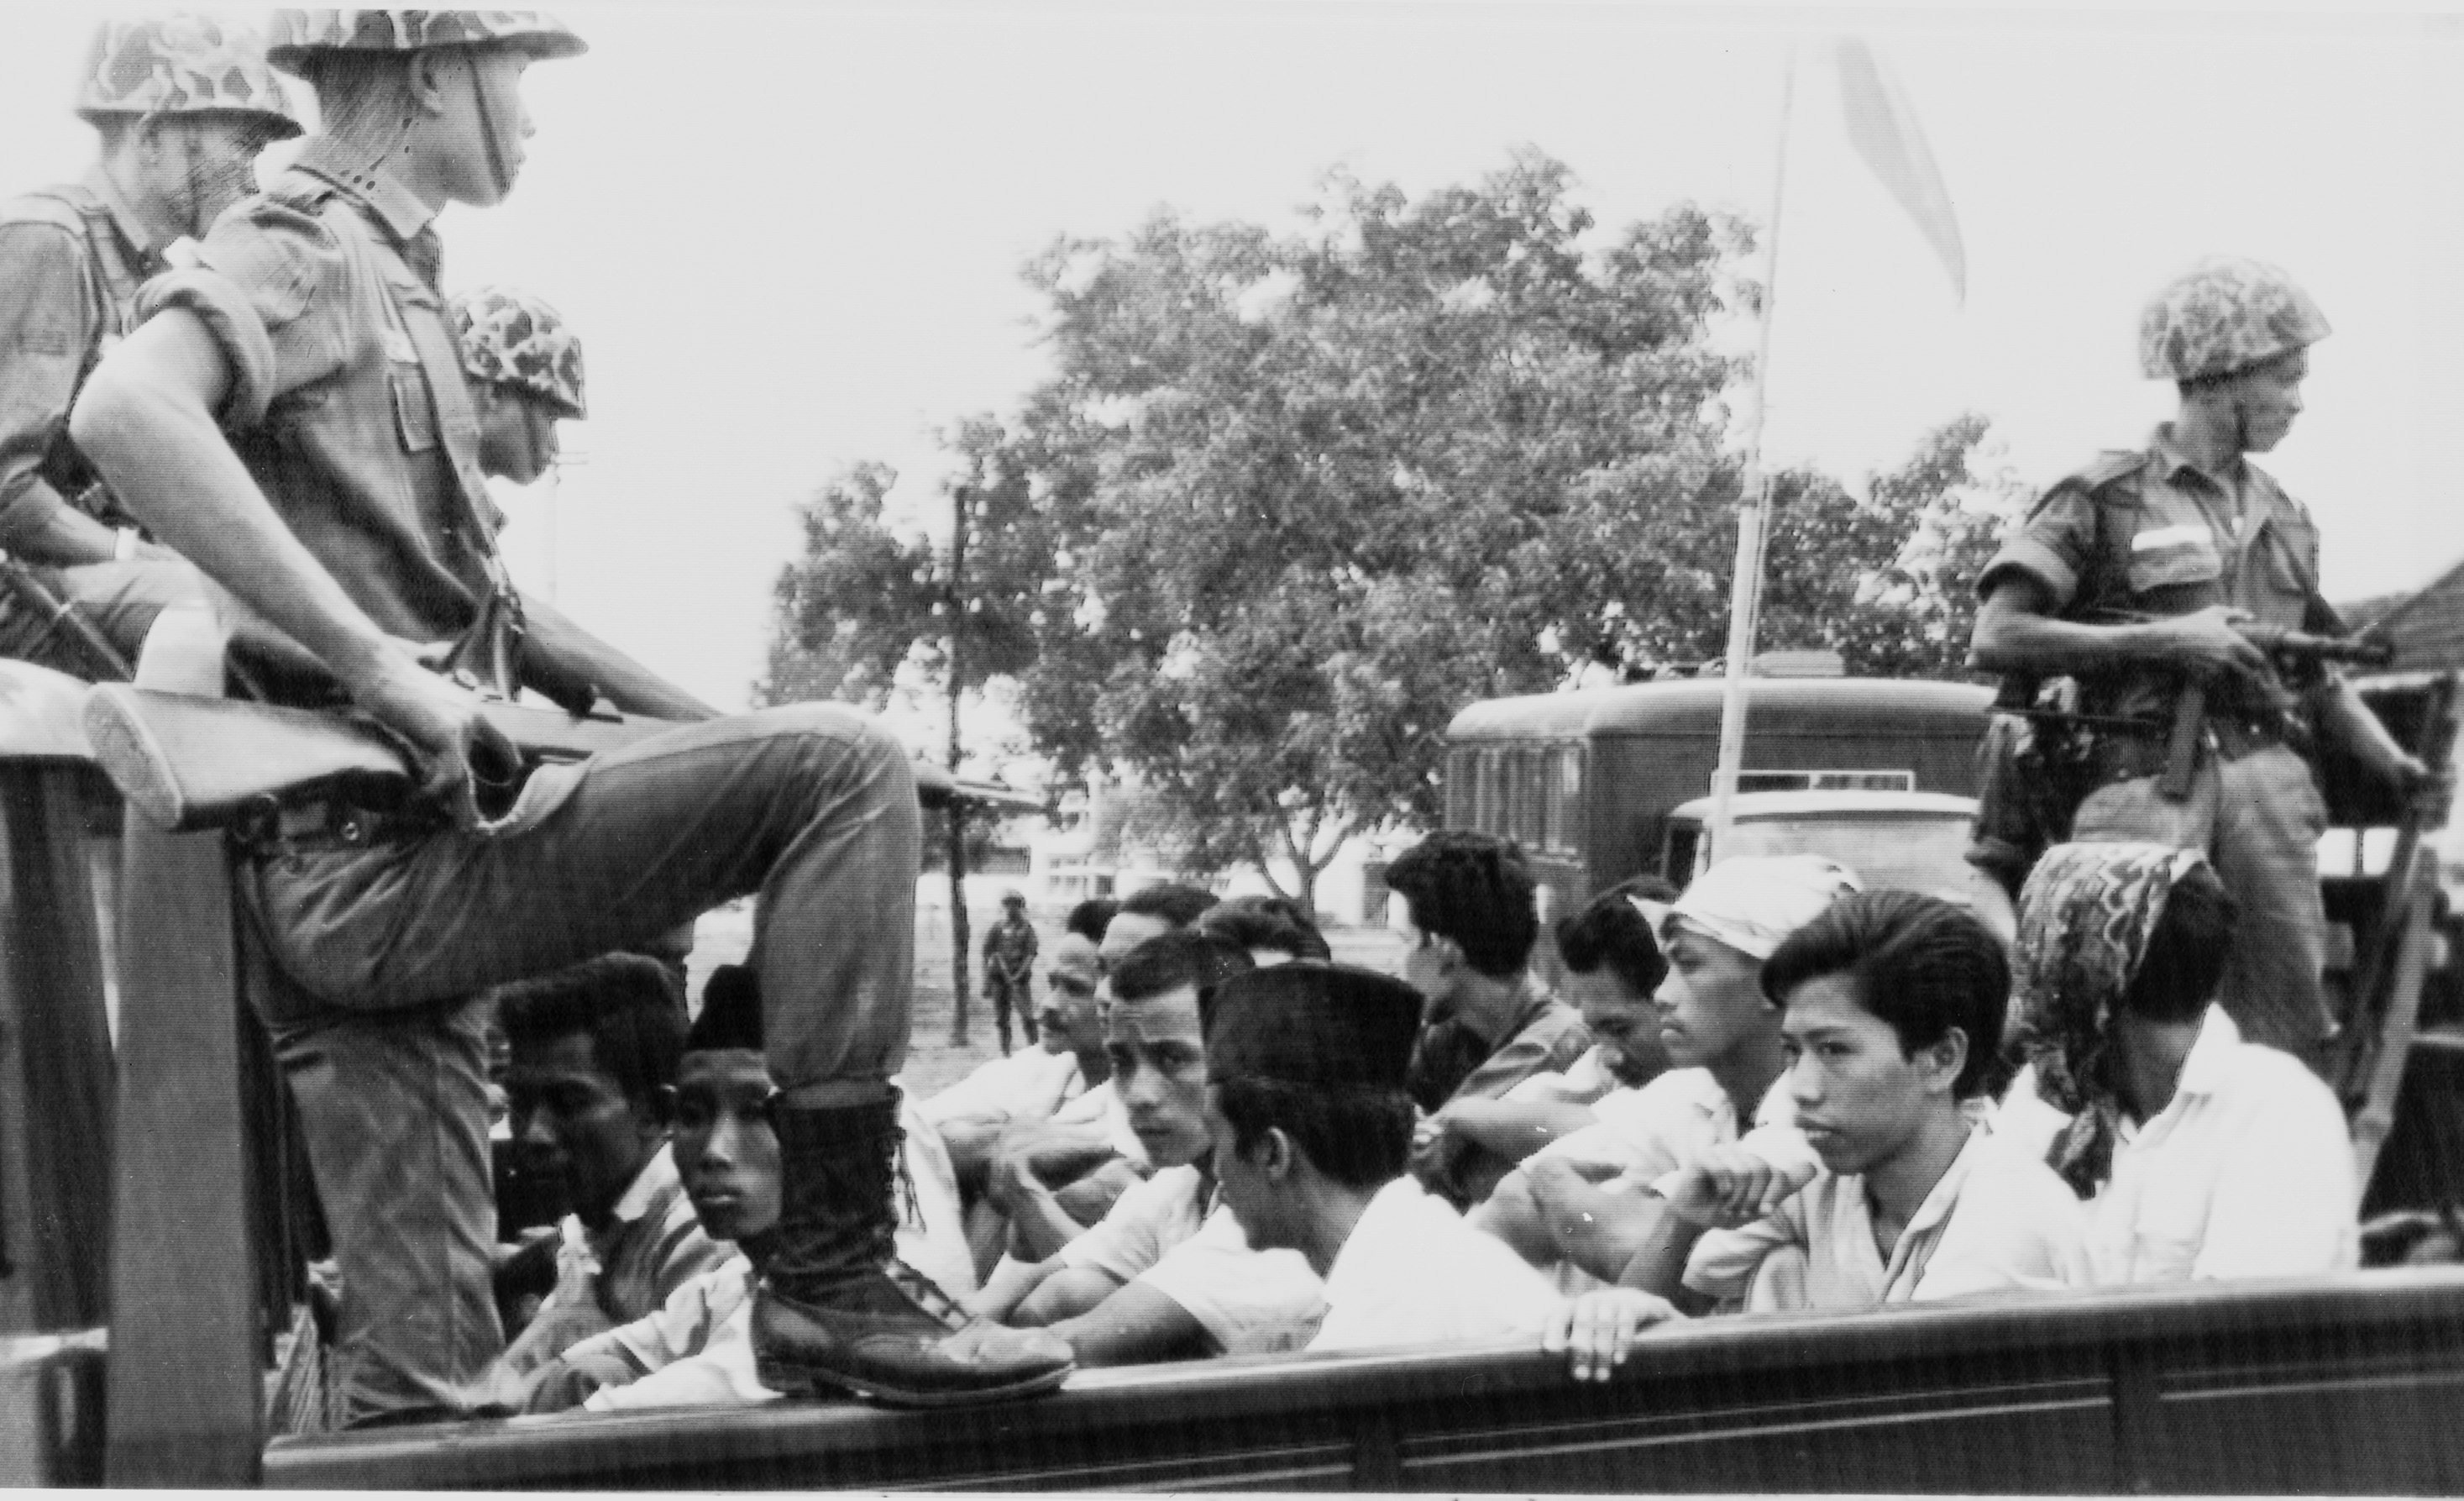 Members of the youth wing of the Communist Party of Indonesia guarded by soldiers on their way to prison in Jakarta on October 30, 1965 as part of a crackdown on communists. Photo: AP